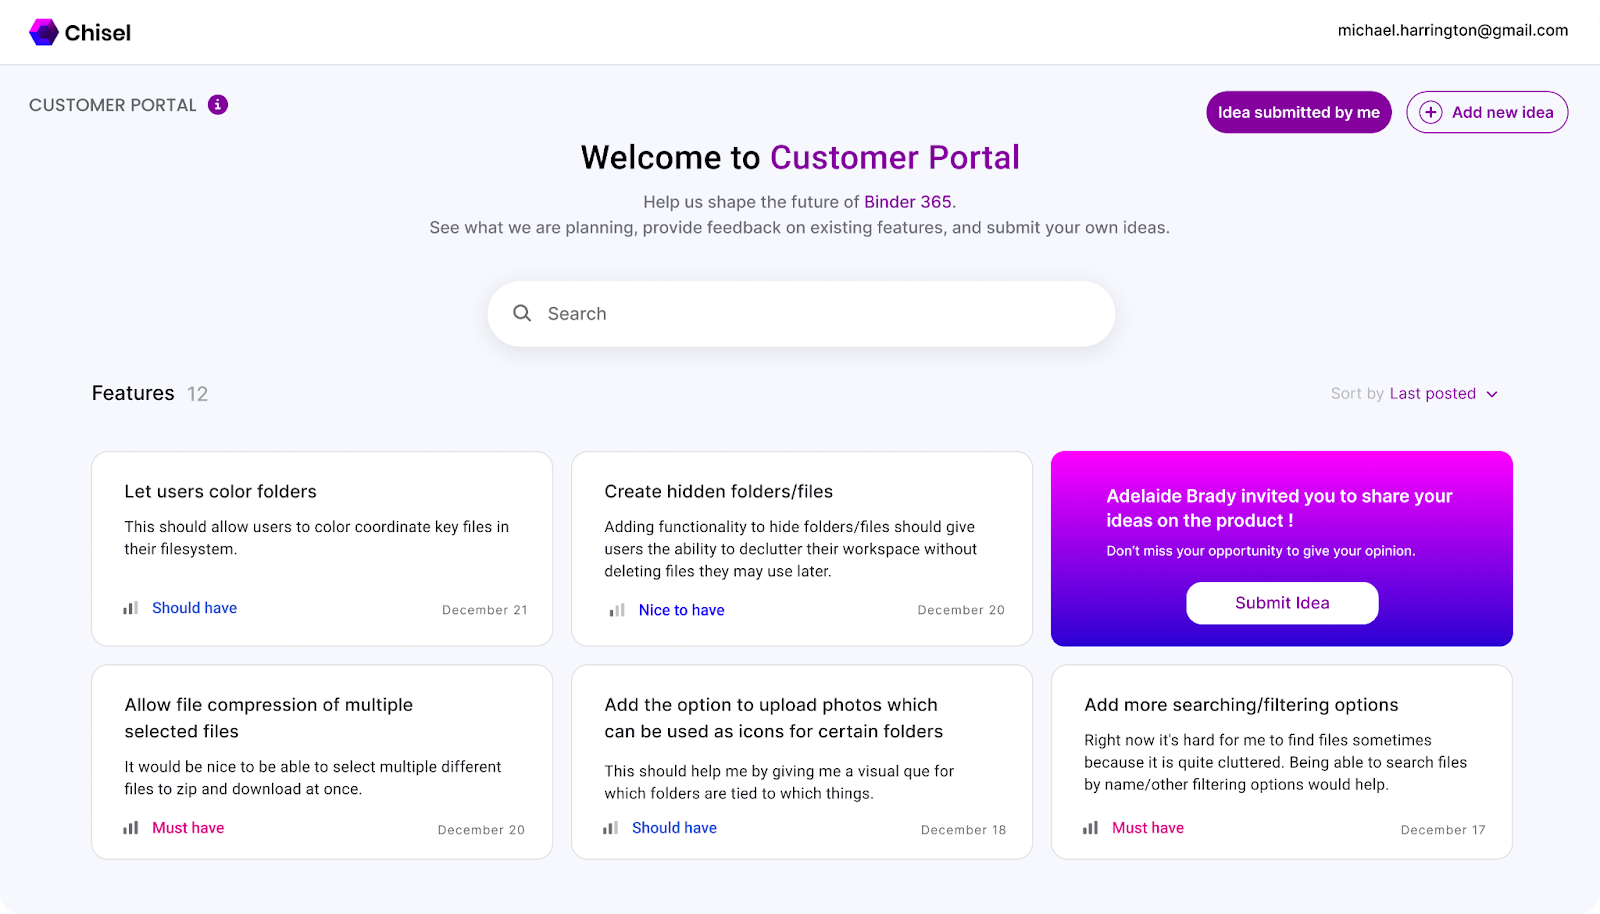 Use Chisel’s Feedback Portal to Capture the Voice of Customers